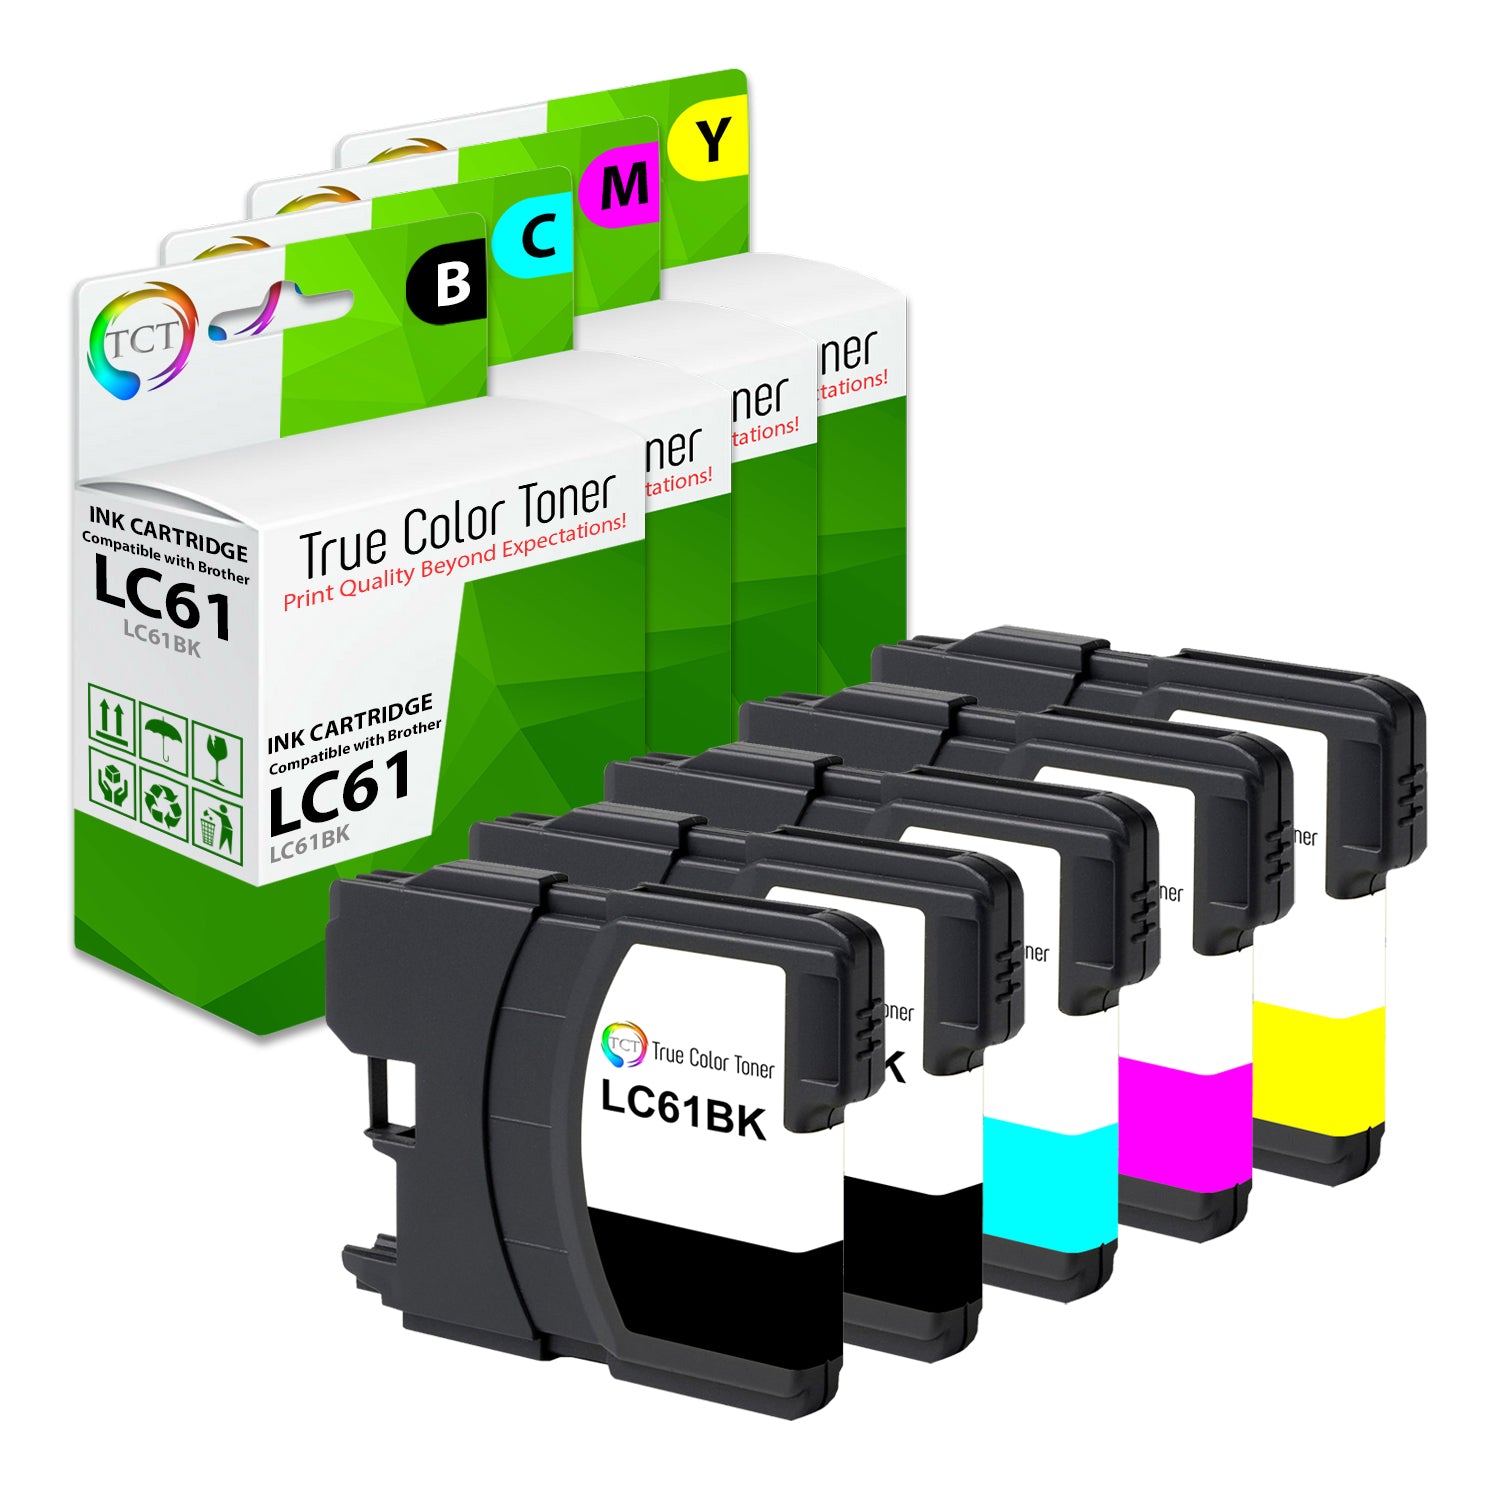 TCT Compatible Ink Cartridge Replacement for the Brother LC61 Series - 5 Pack (B, C, M, Y)